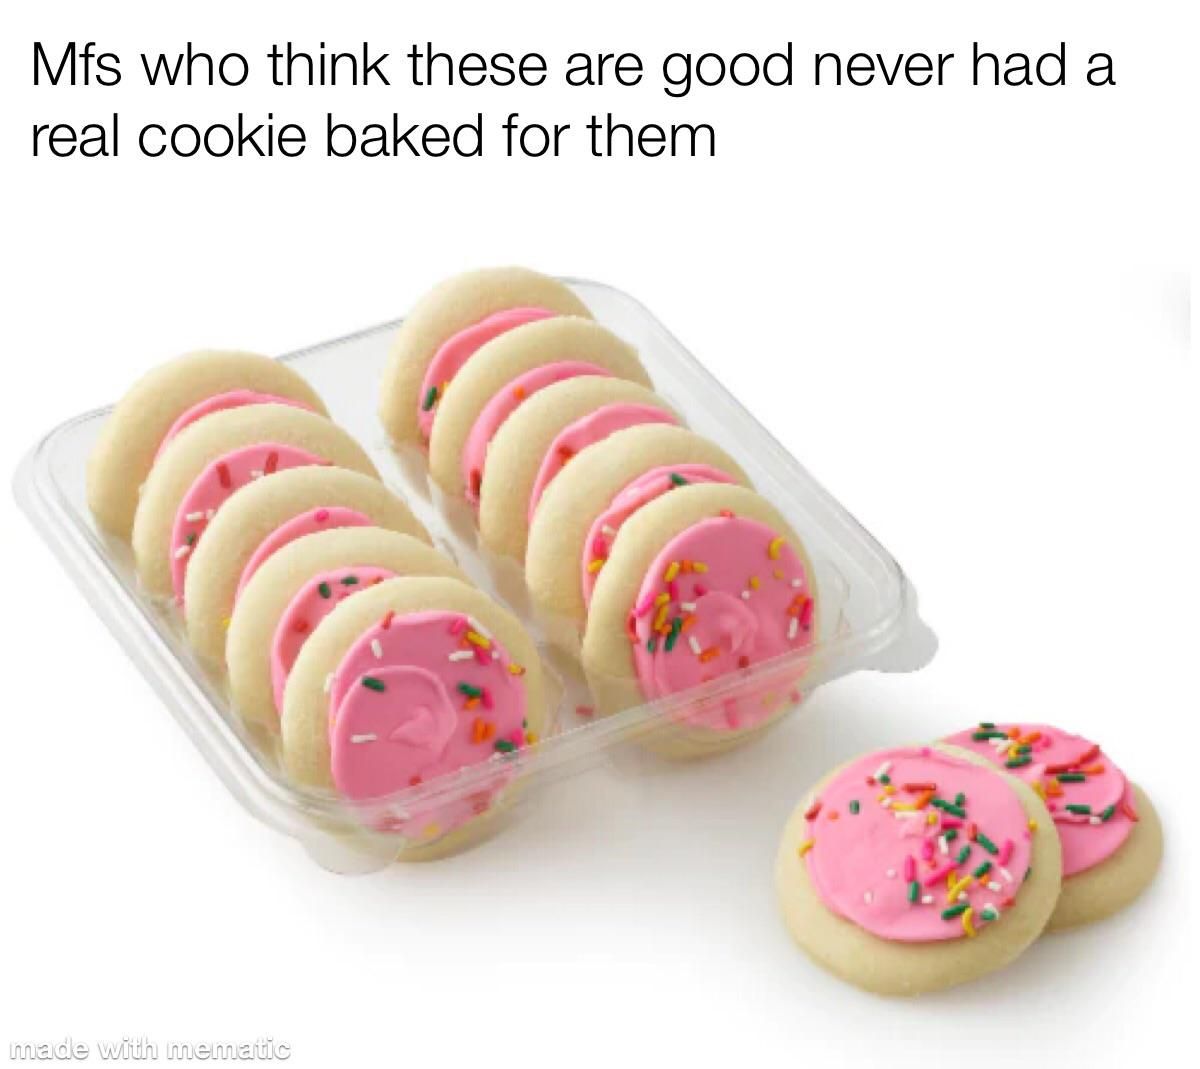 I’m sorry but these are industrial waste made to look like cookies